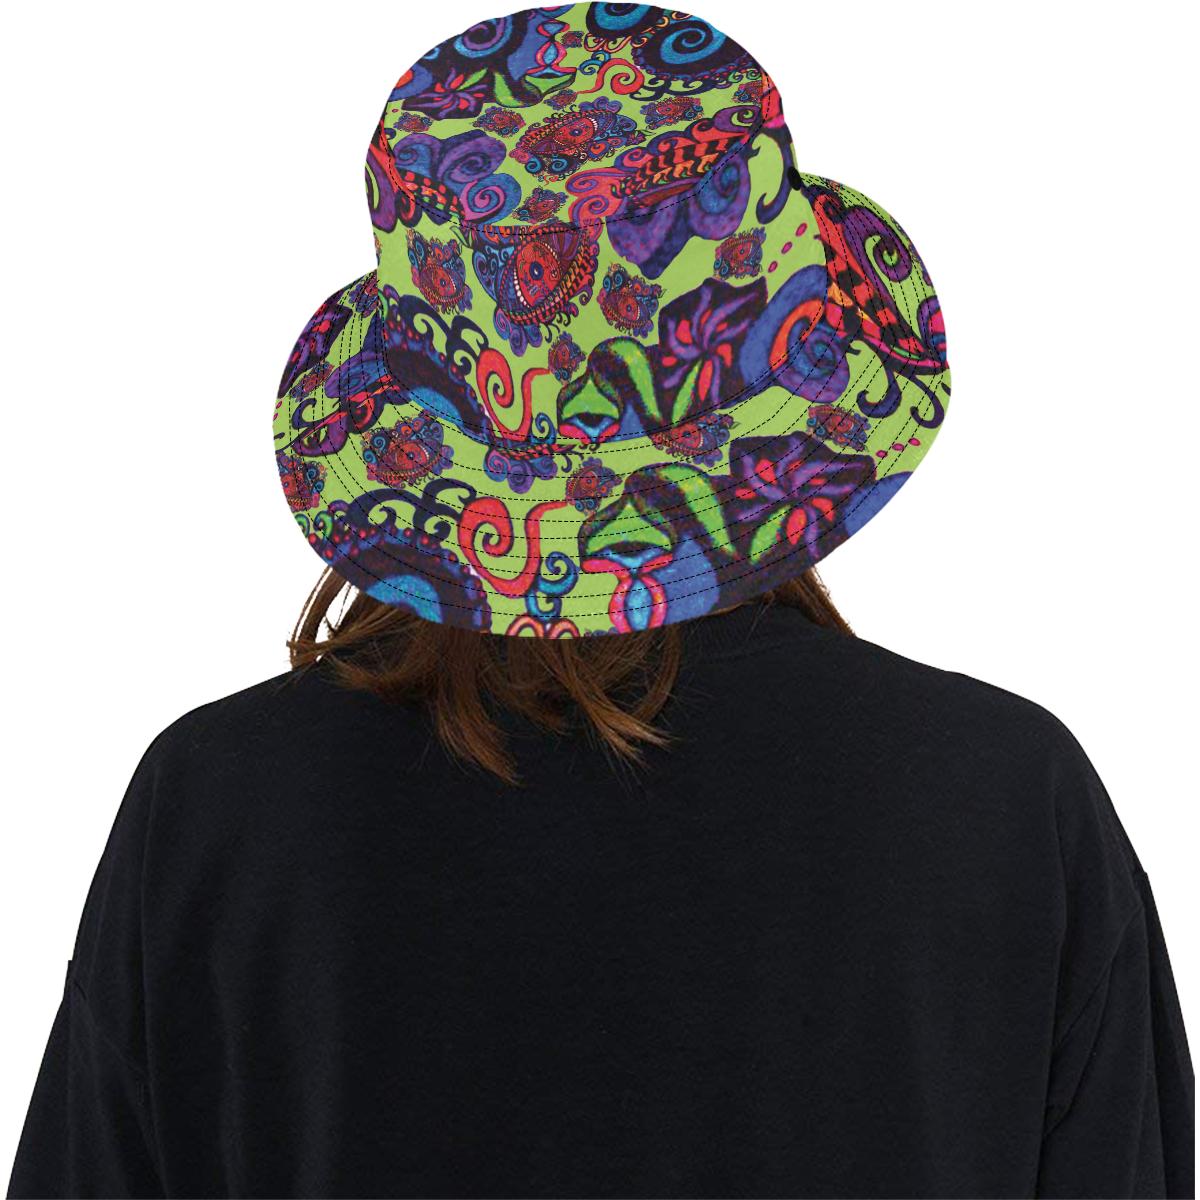 Your Paisley Eyes by Aleta All Over Print Bucket Hat